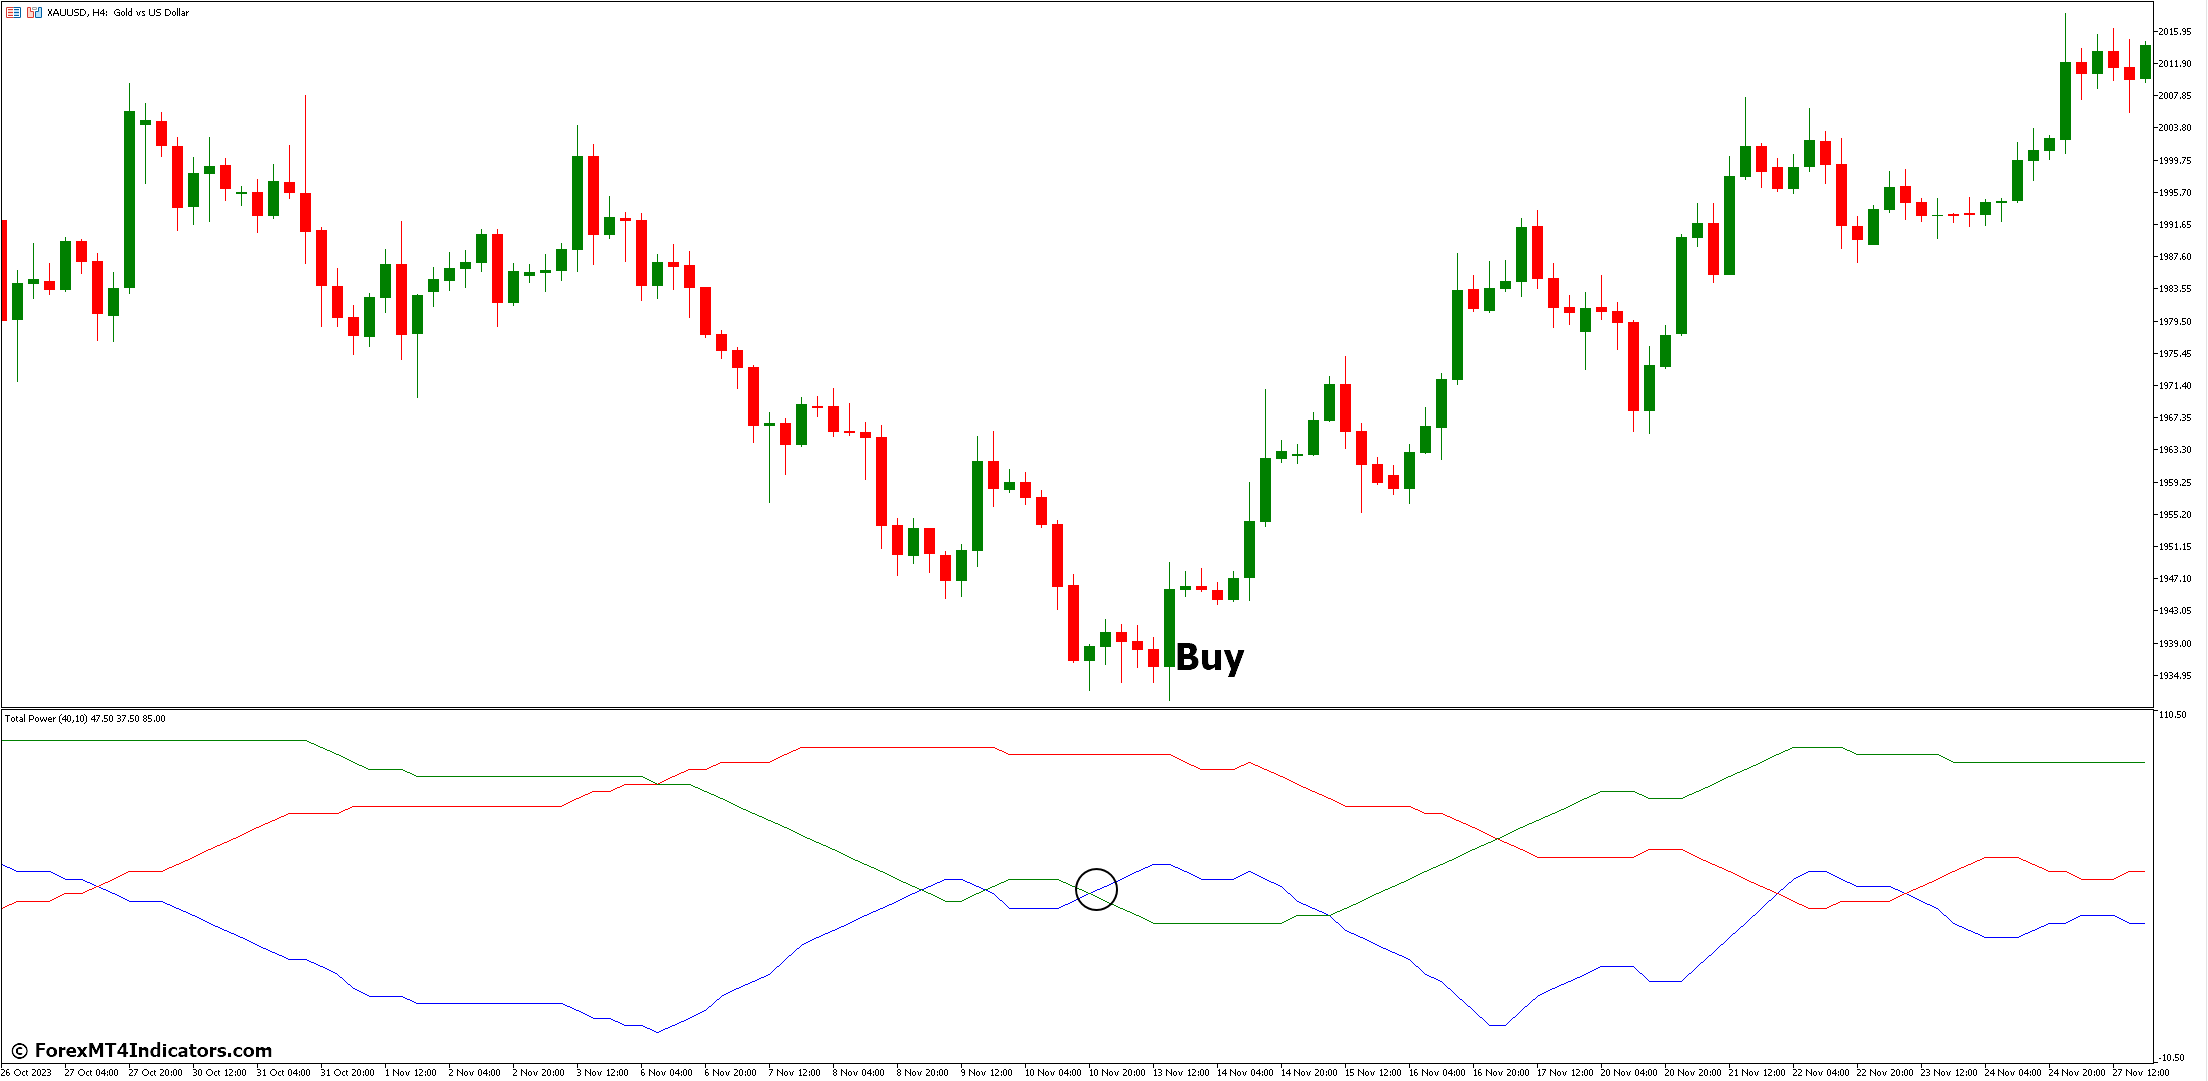 How to Trade with Total Power Indicator - Buy Entry